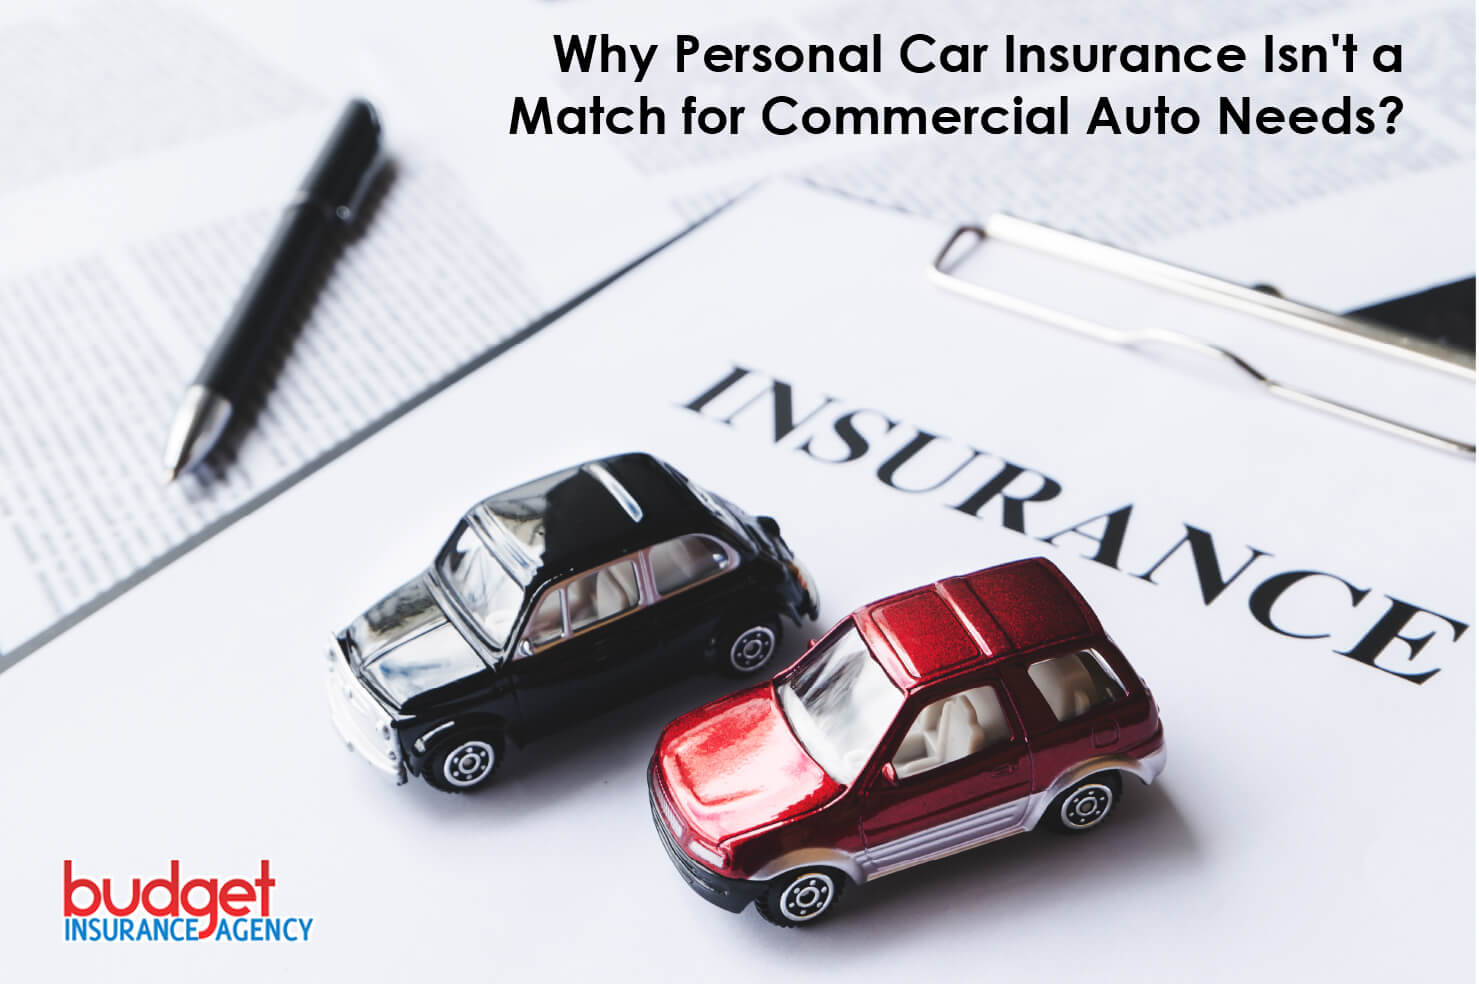 Why Personal Car Insurance Isn't a Match for Commercial Auto Needs?